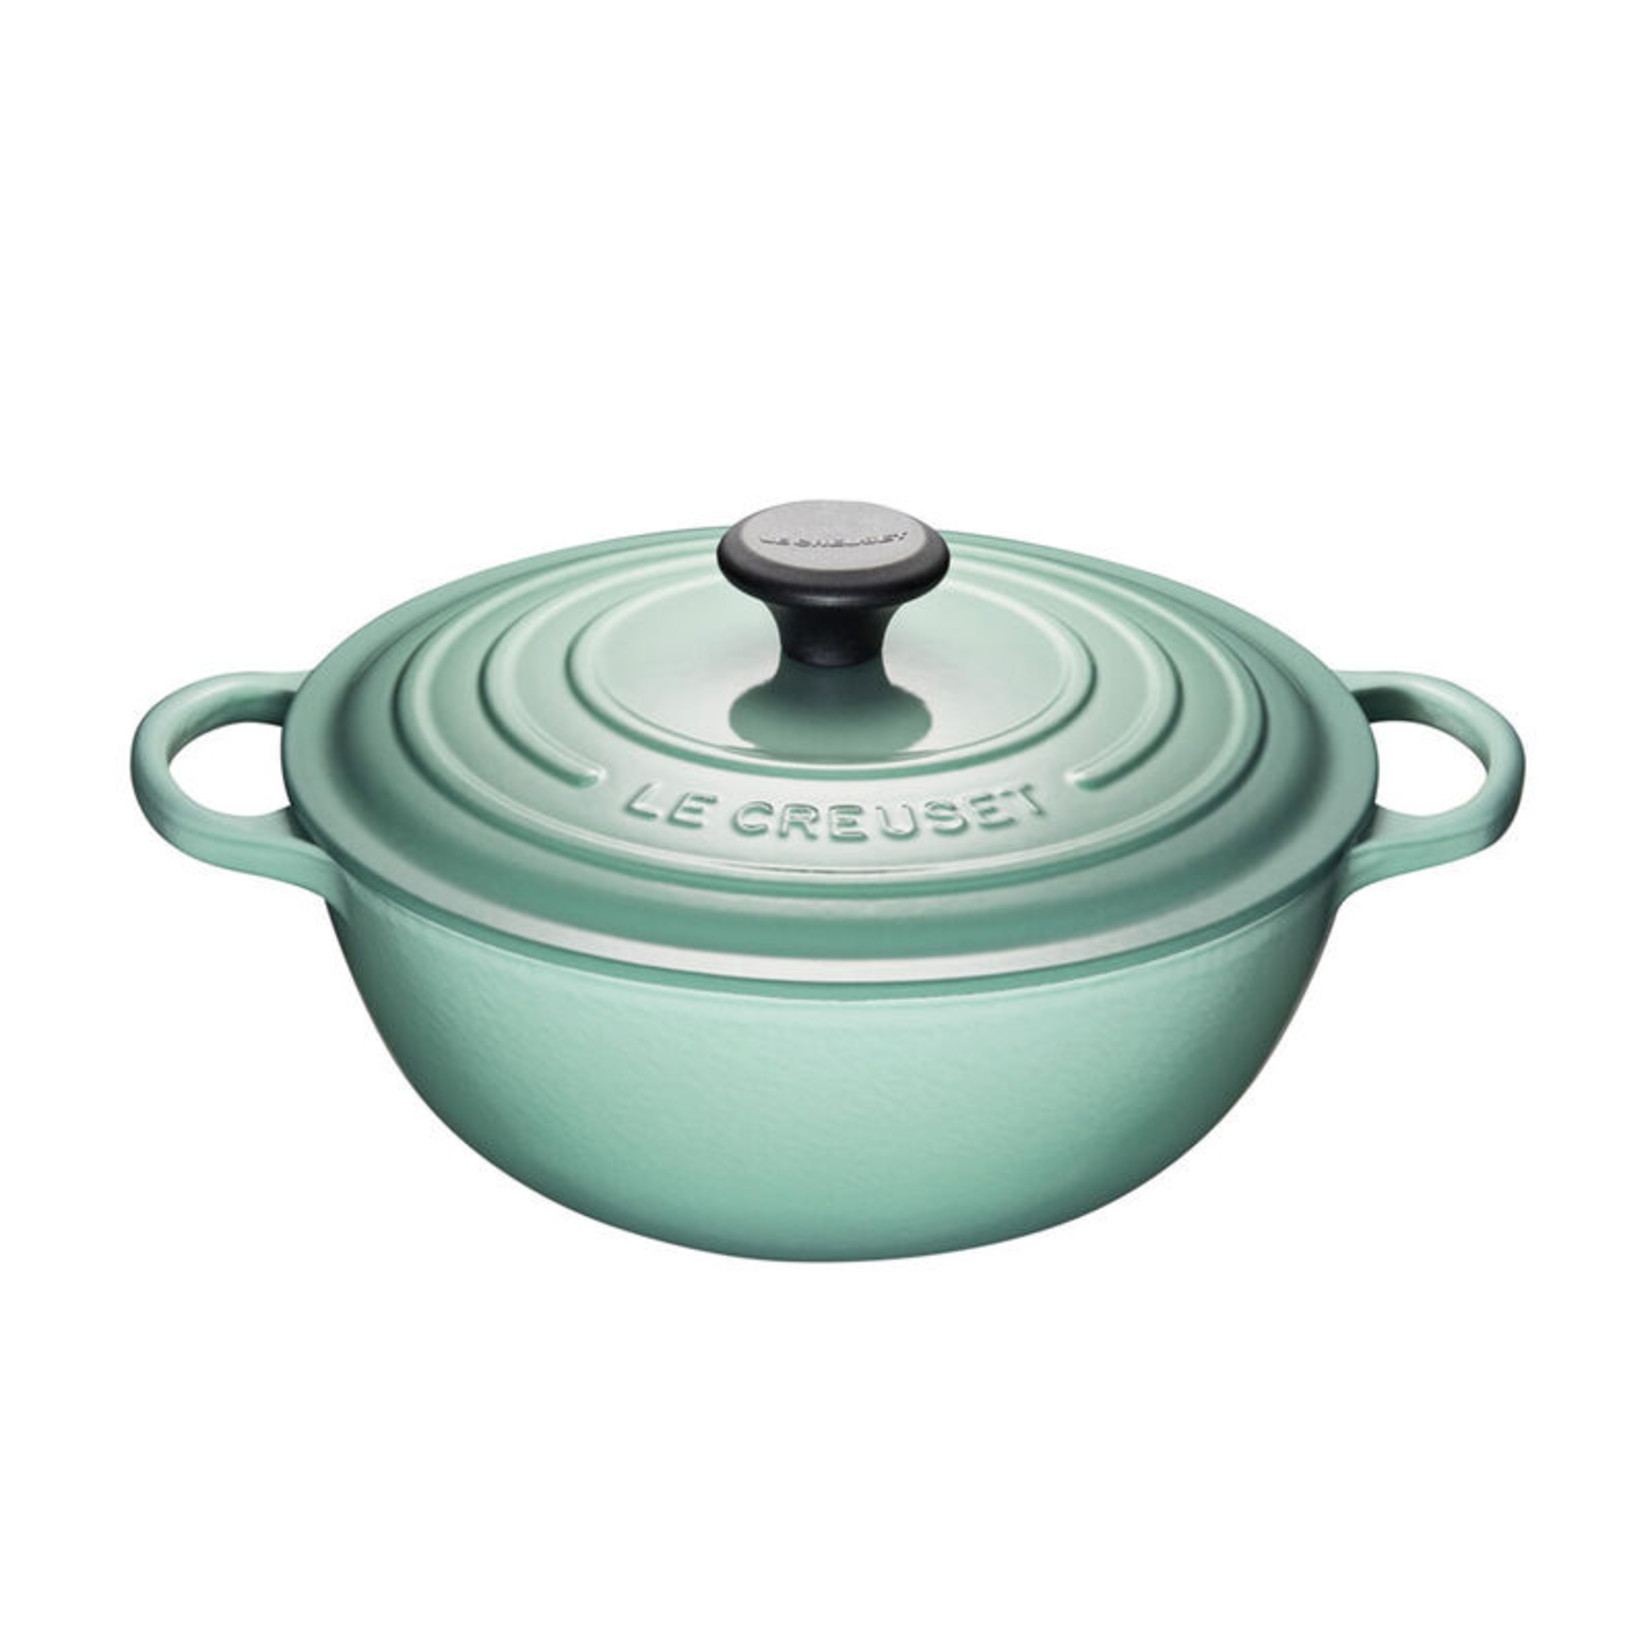 Le Creuset 4.1 L Chef’s French Oven